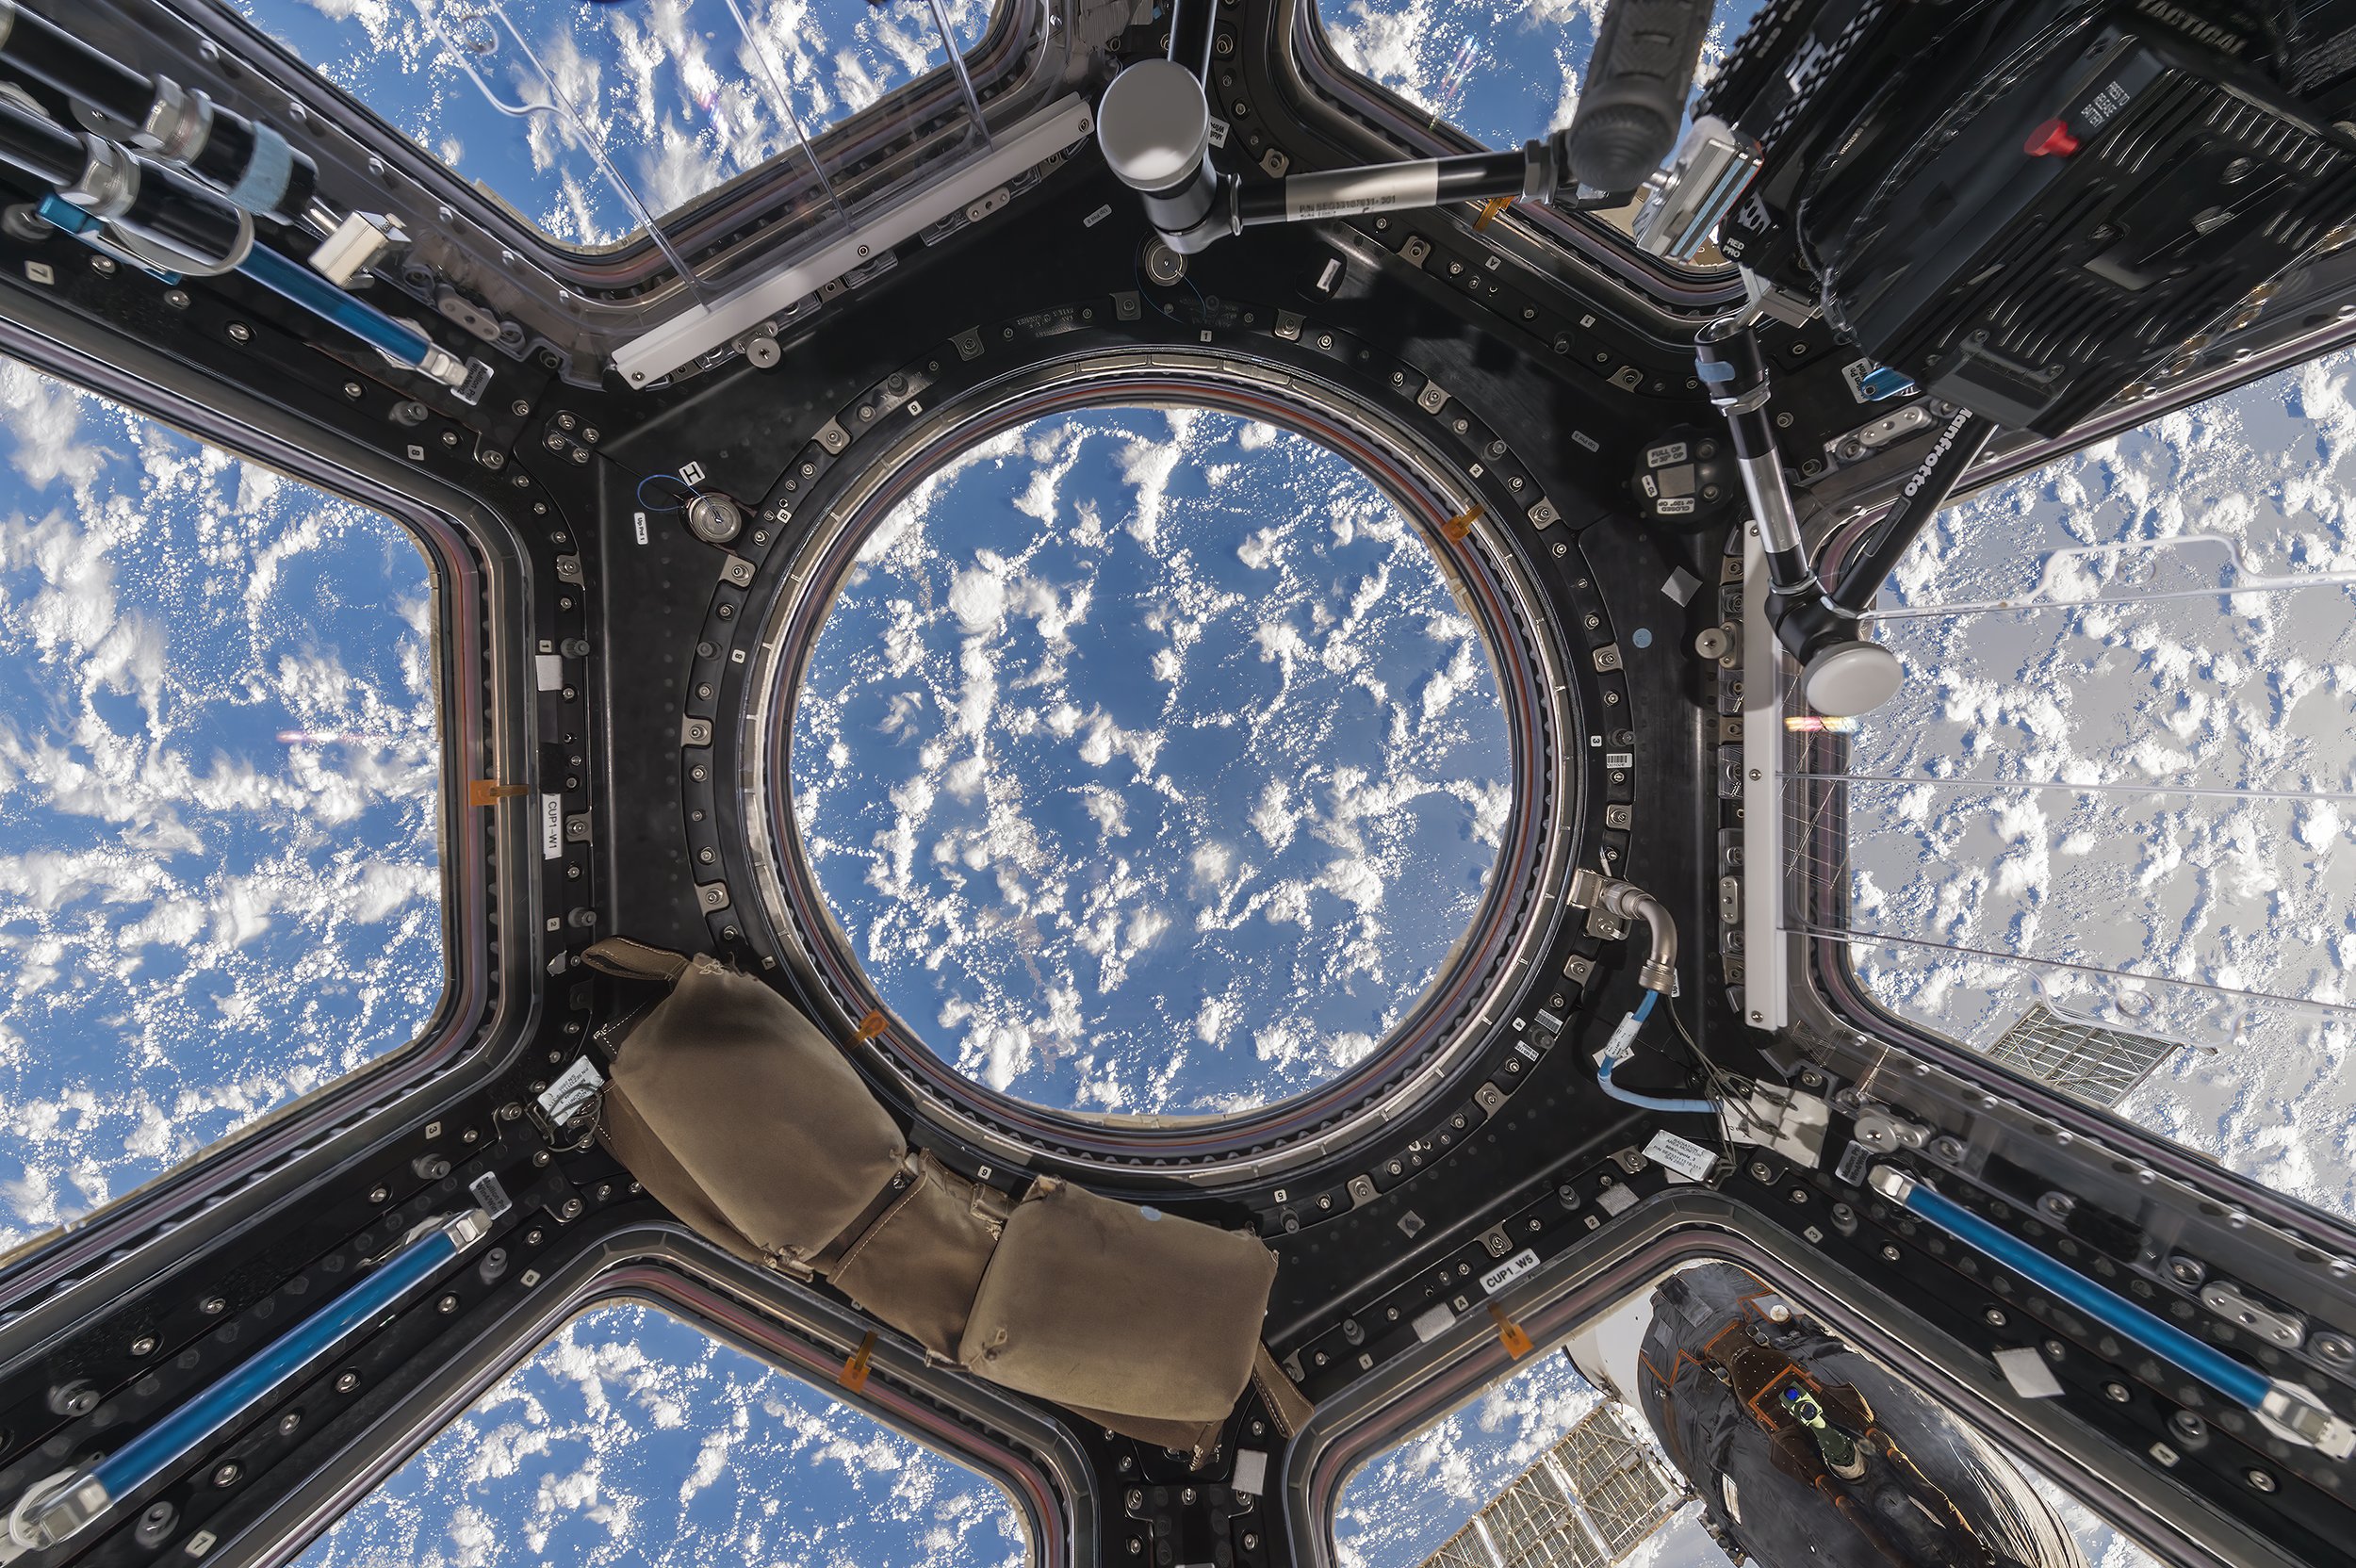  Roland Miller and Paolo Nespoli,  Cupola with Clouds and Ocean , 2020. Chromogenic color print. Courtesy of the artist. 